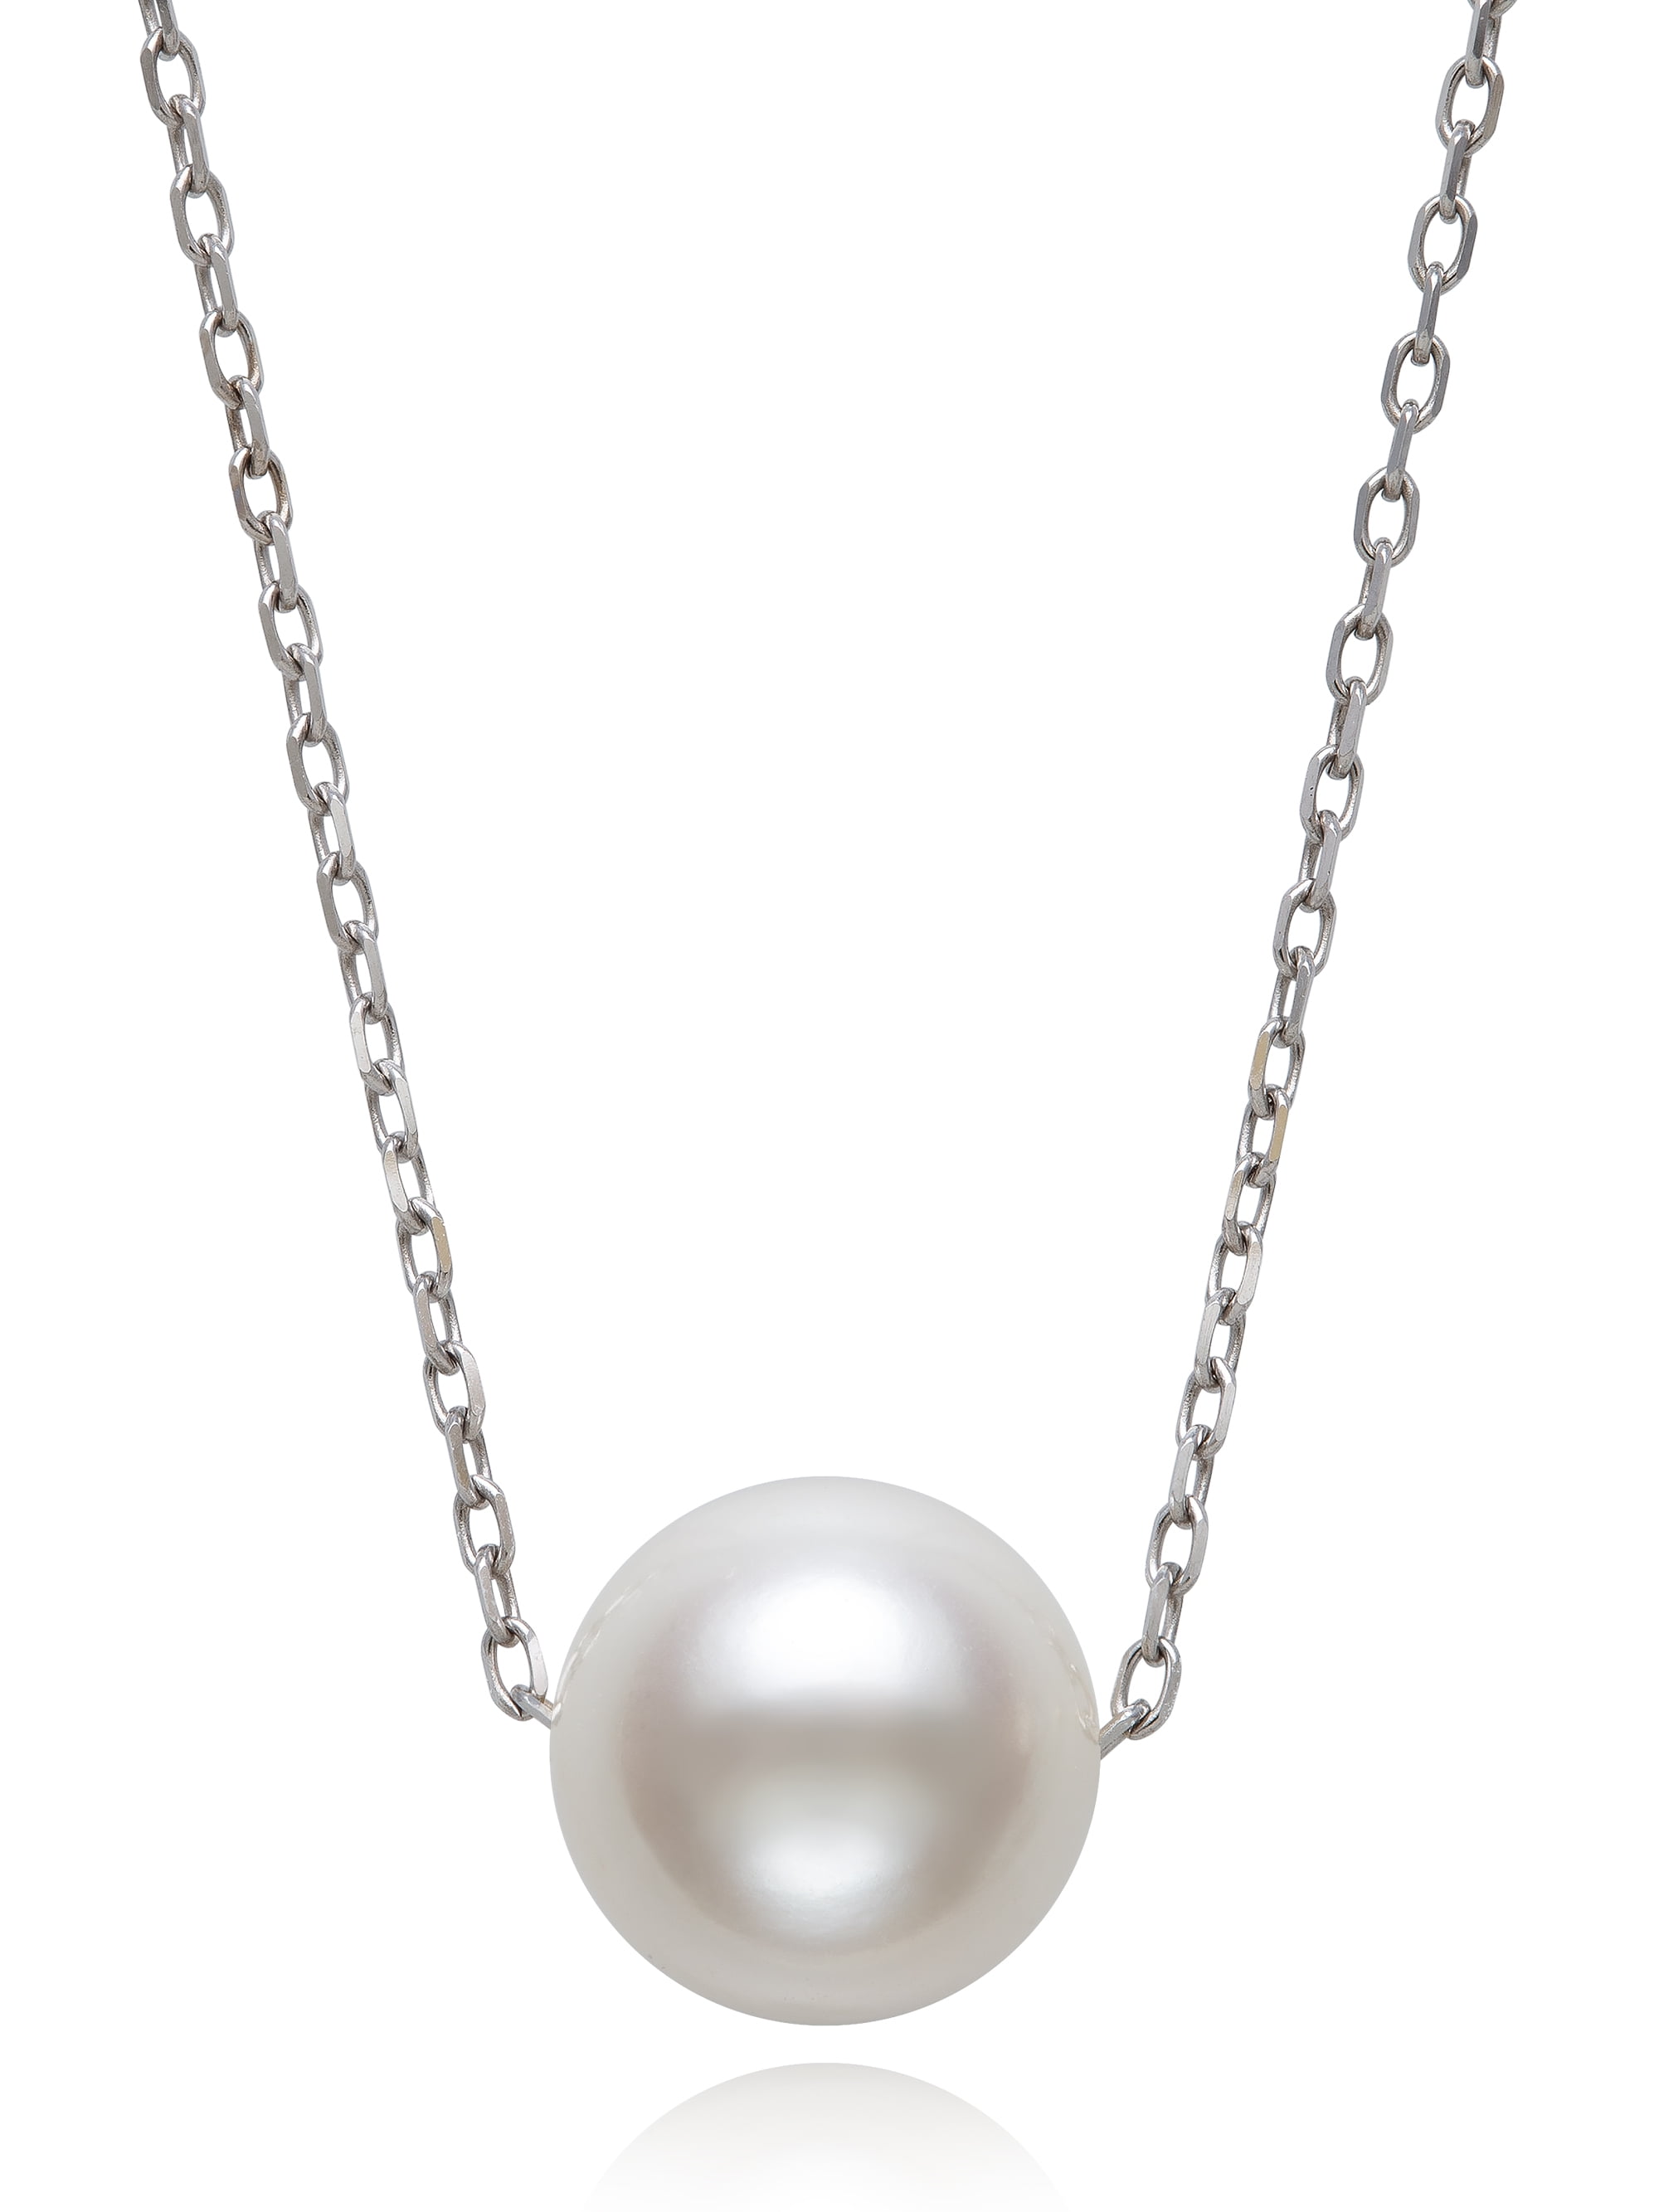 Pearlzzz Single Floating Cultured White Freshwater Pearl 14K White Gold  Chain Necklace, 18